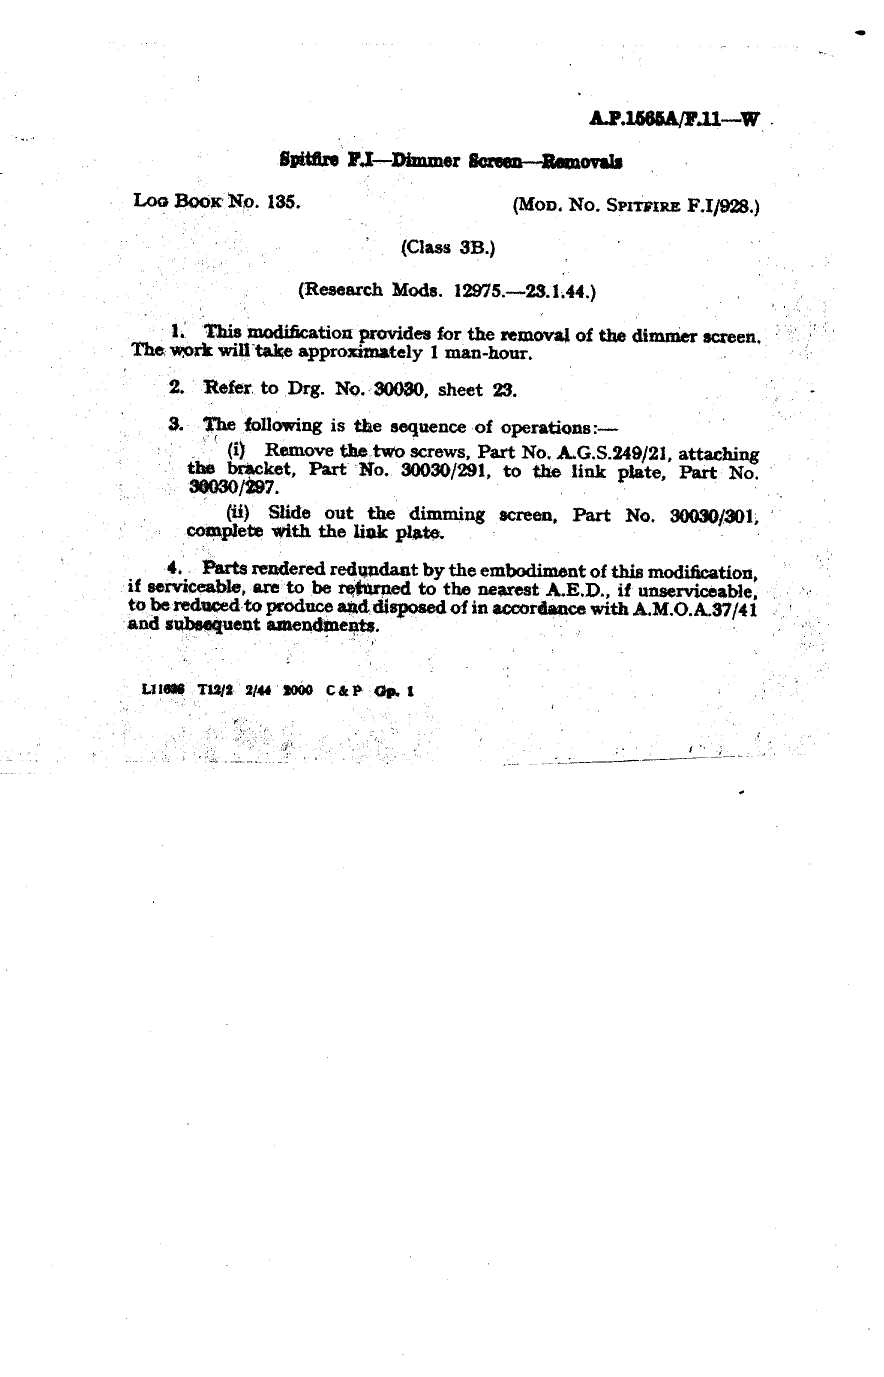 Sample page 1 from AirCorps Library document: Spitfire F.I Dimmer Screen Removals